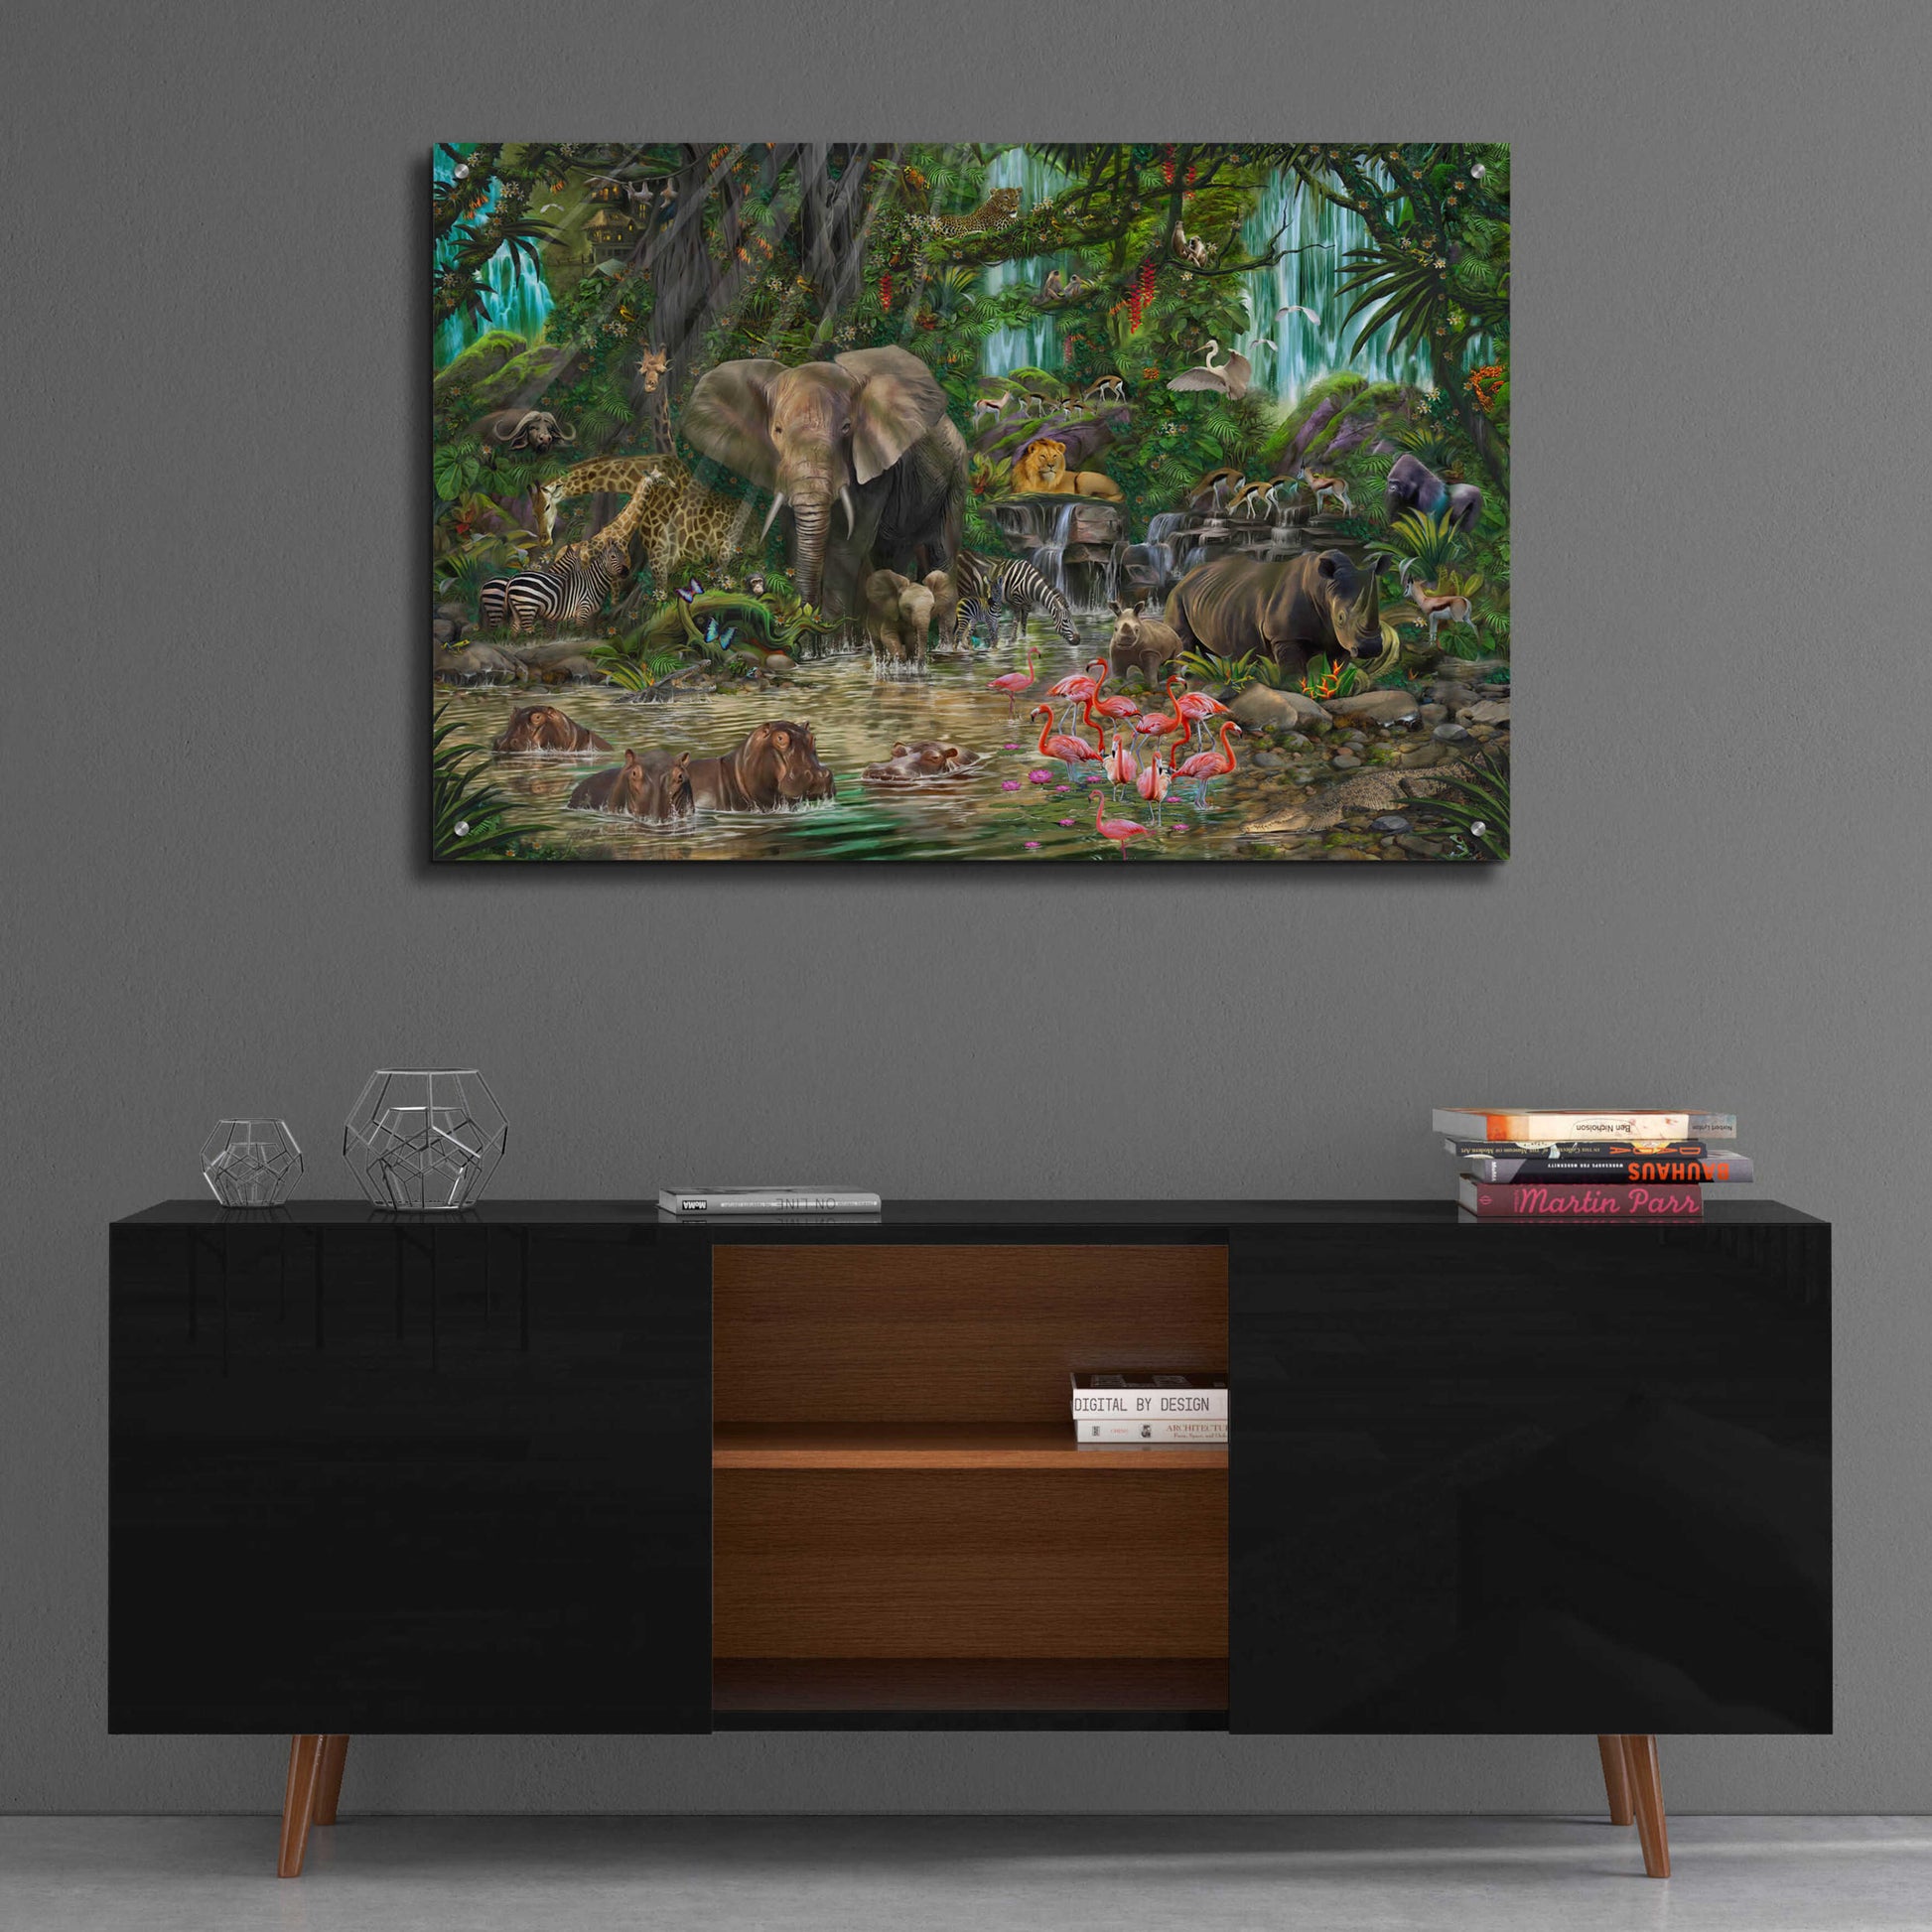 Epic Art 'Great Africa' by Enright, Acrylic Glass Wall Art,36x24